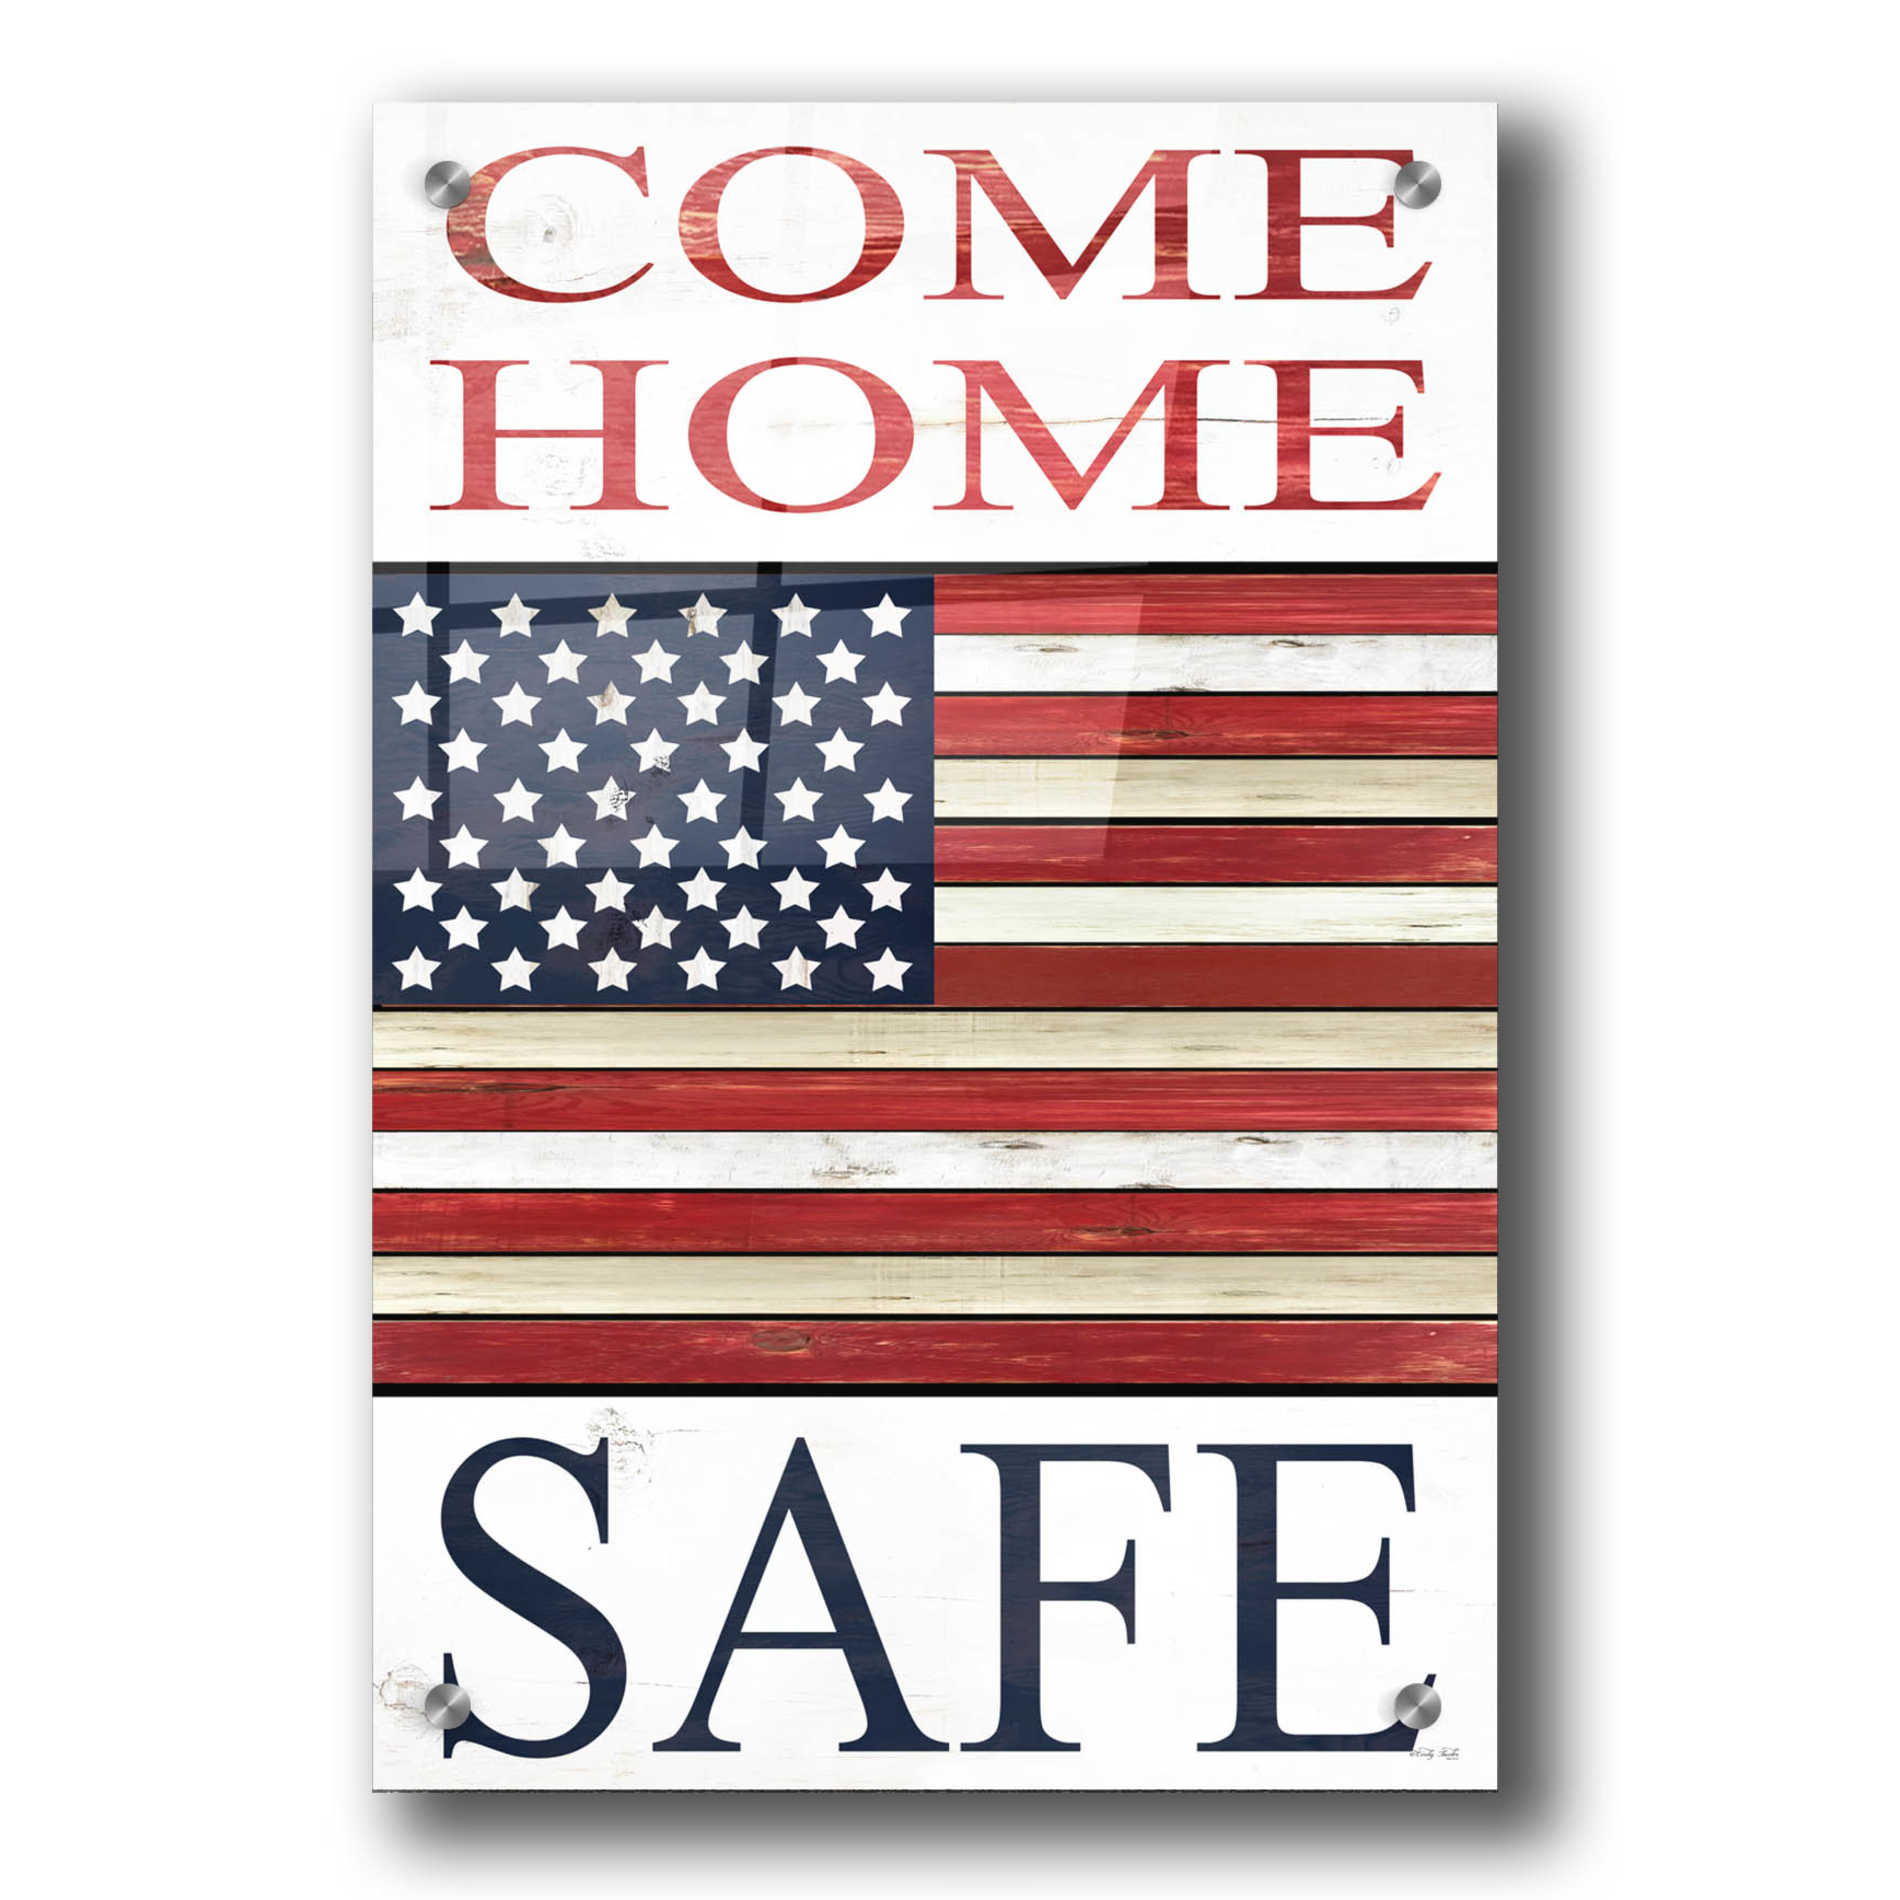 Epic Art 'Come Home Safe Patriot' by Cindy Jacobs, Acrylic Glass Wall Art,24x36